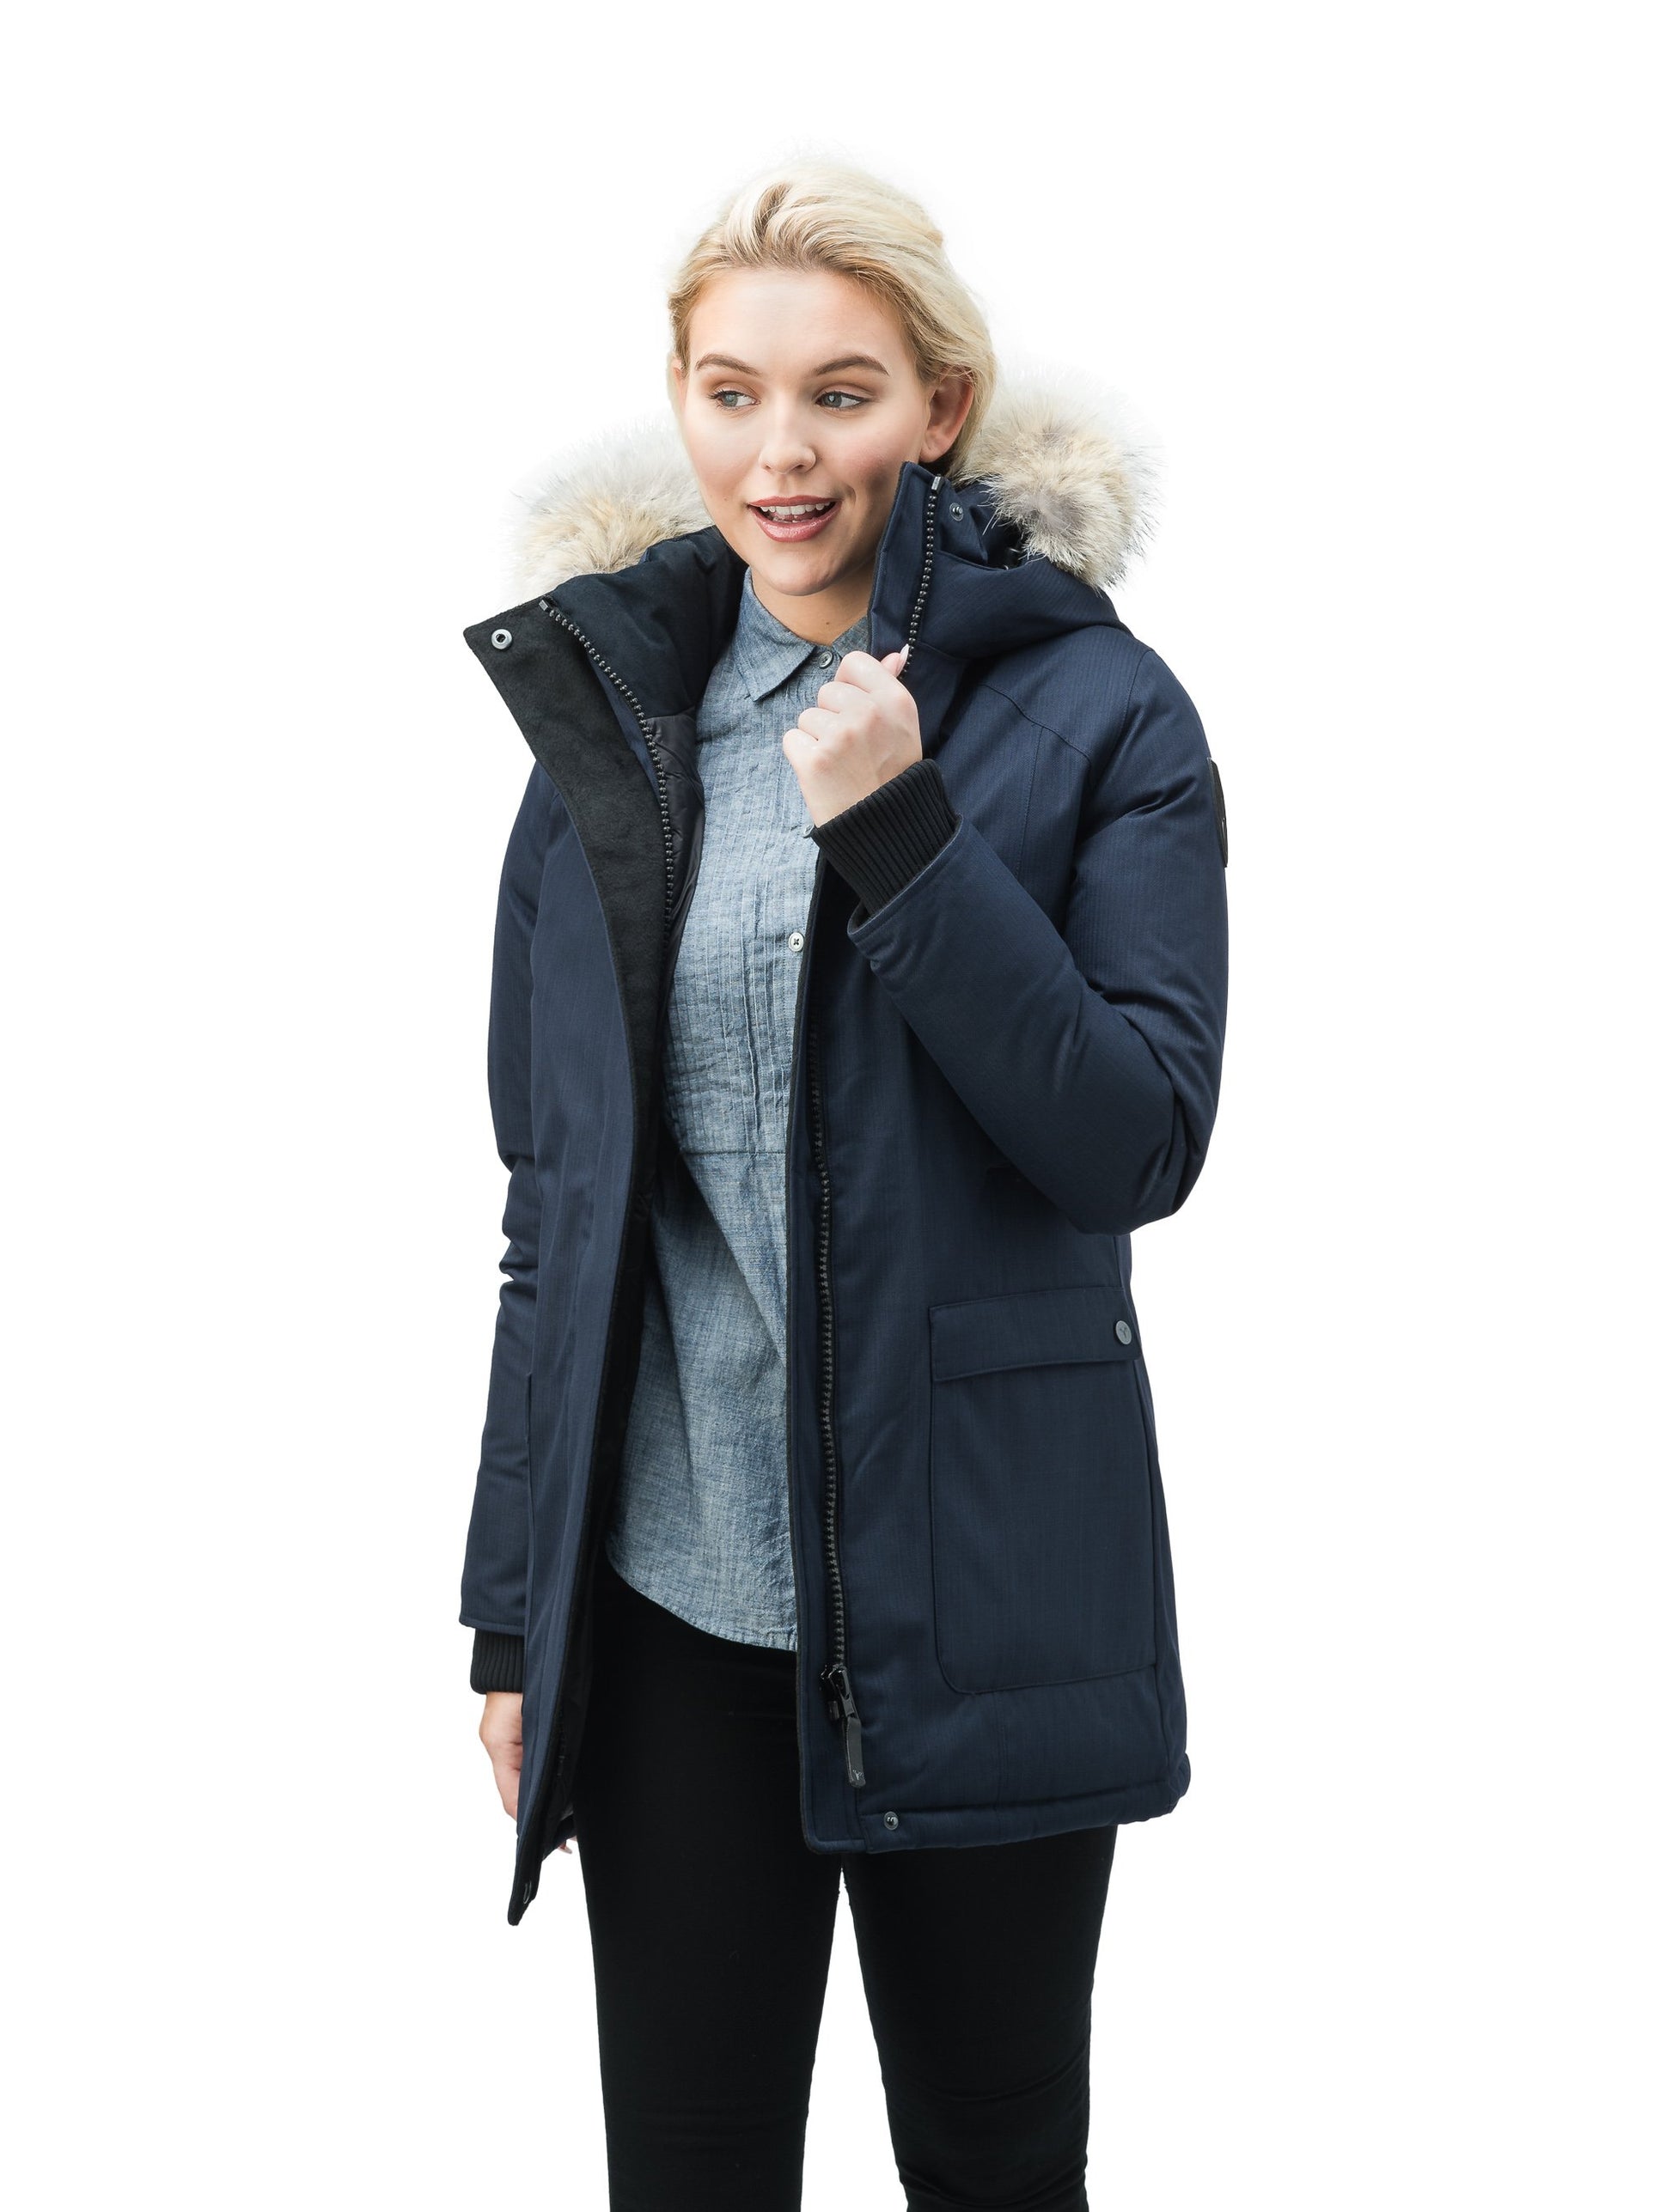 Women's down filled parka that sits just below the hip with a clean look and two hip patch pockets in CH Navy